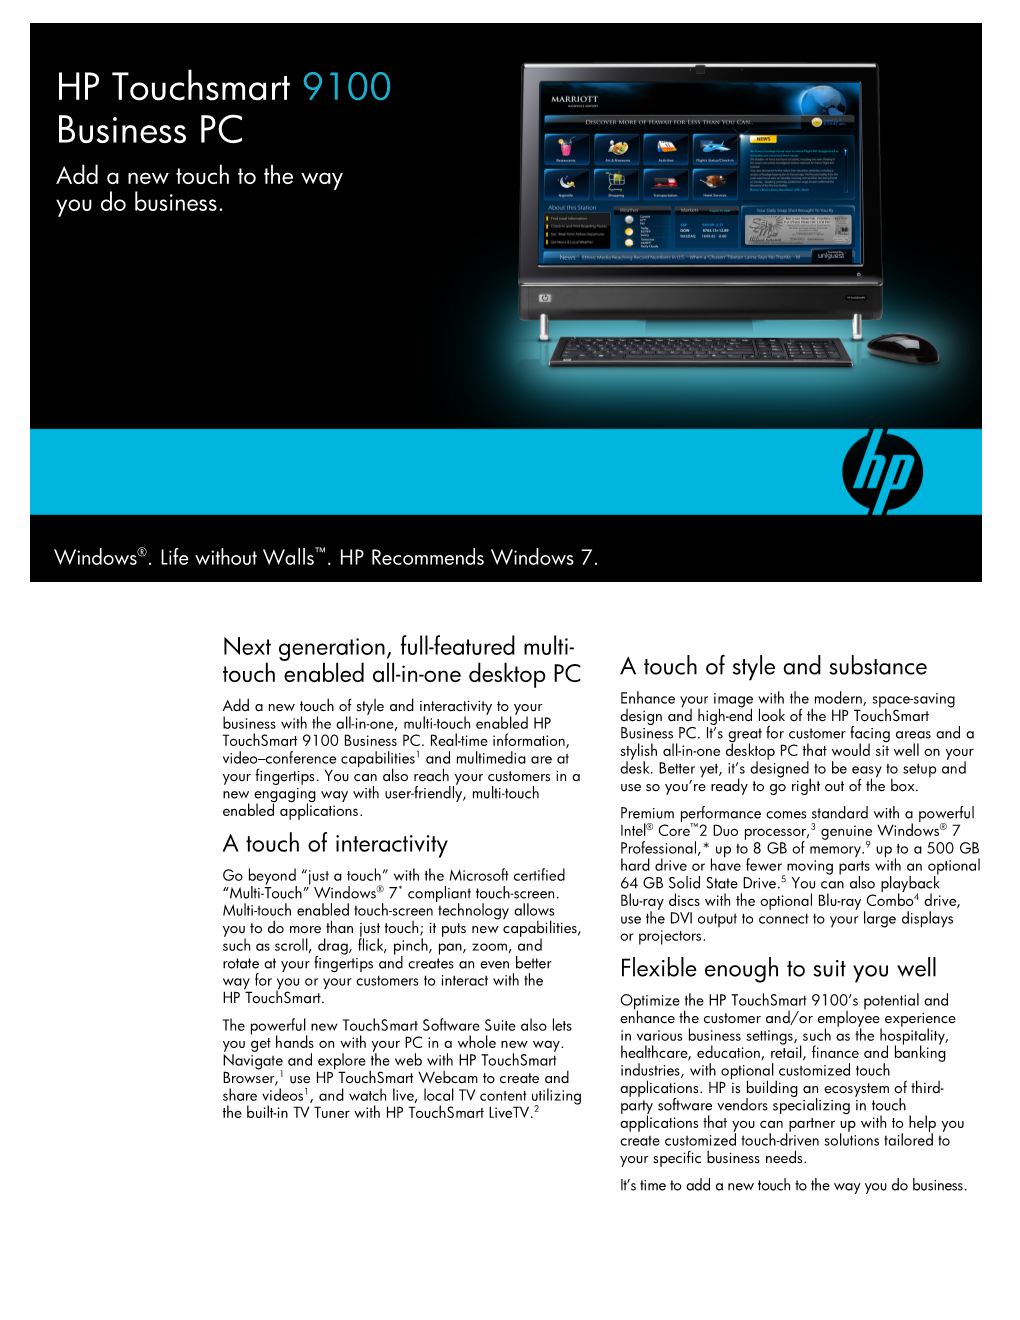 HP Touchsmart 9100 Business PC Add a New Touch to the Way You Do Business